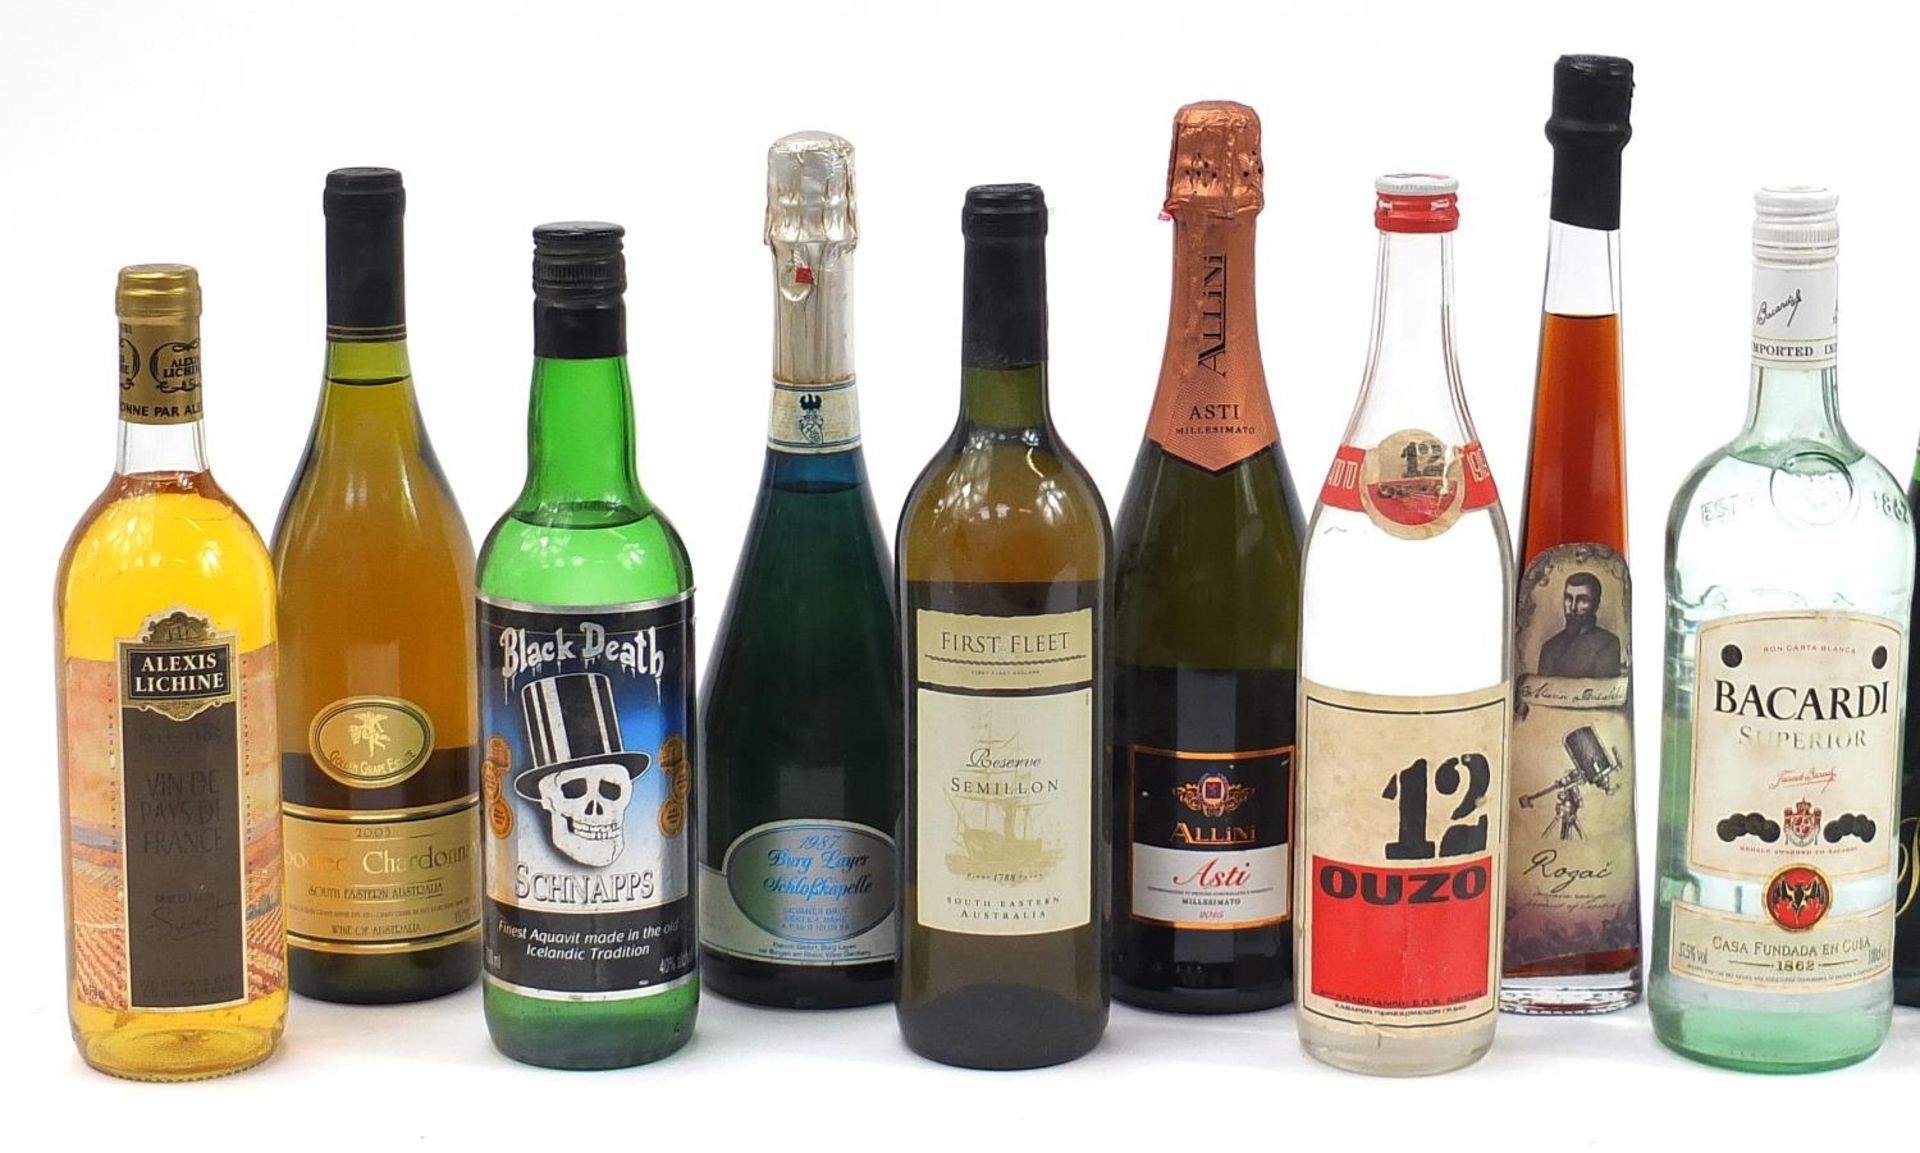 Fifteen bottles of alcohol including Colimonts Chardonnay, Bacardi and wooded Chardonnay - Image 2 of 3